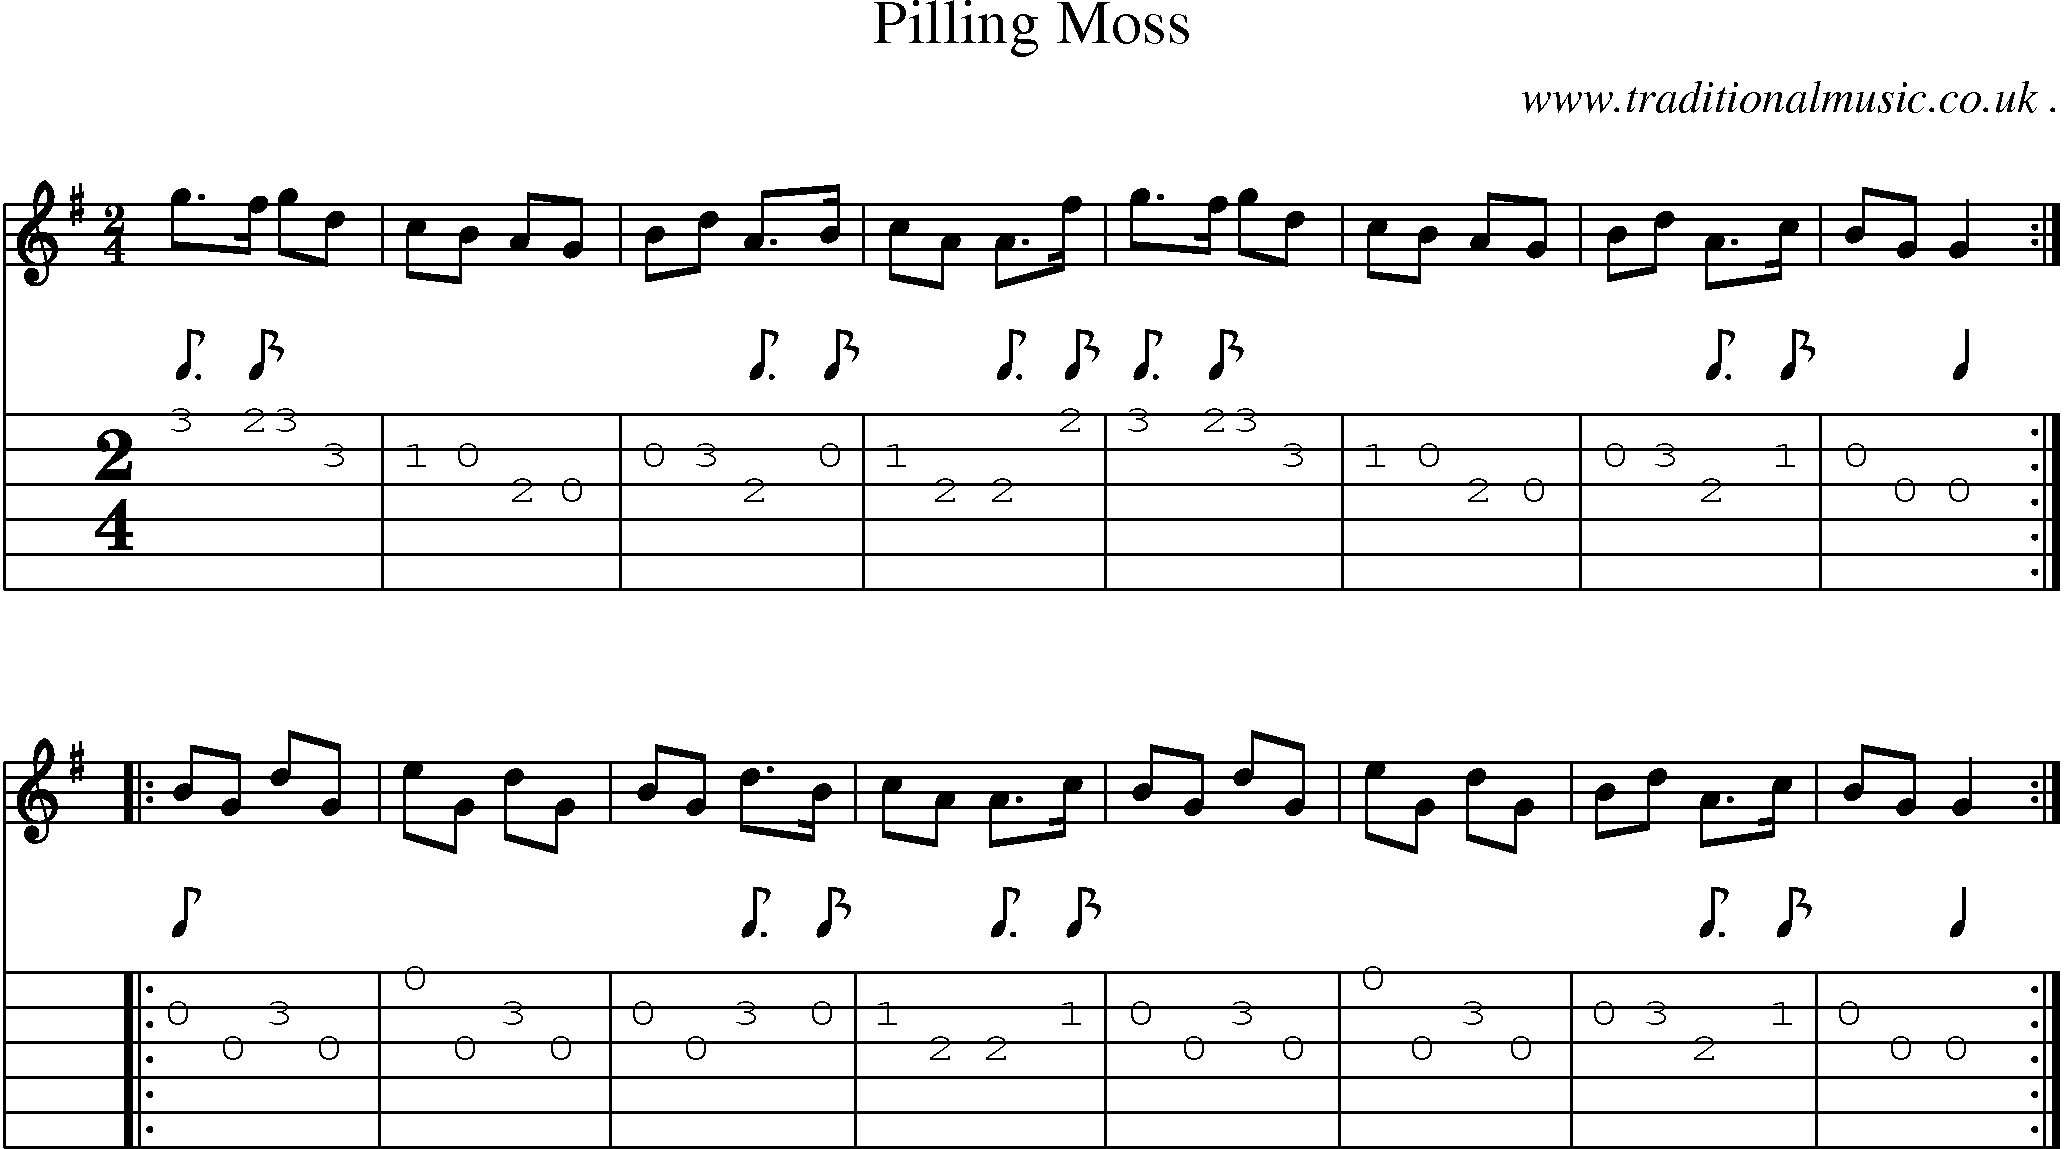 Sheet-Music and Guitar Tabs for Pilling Moss